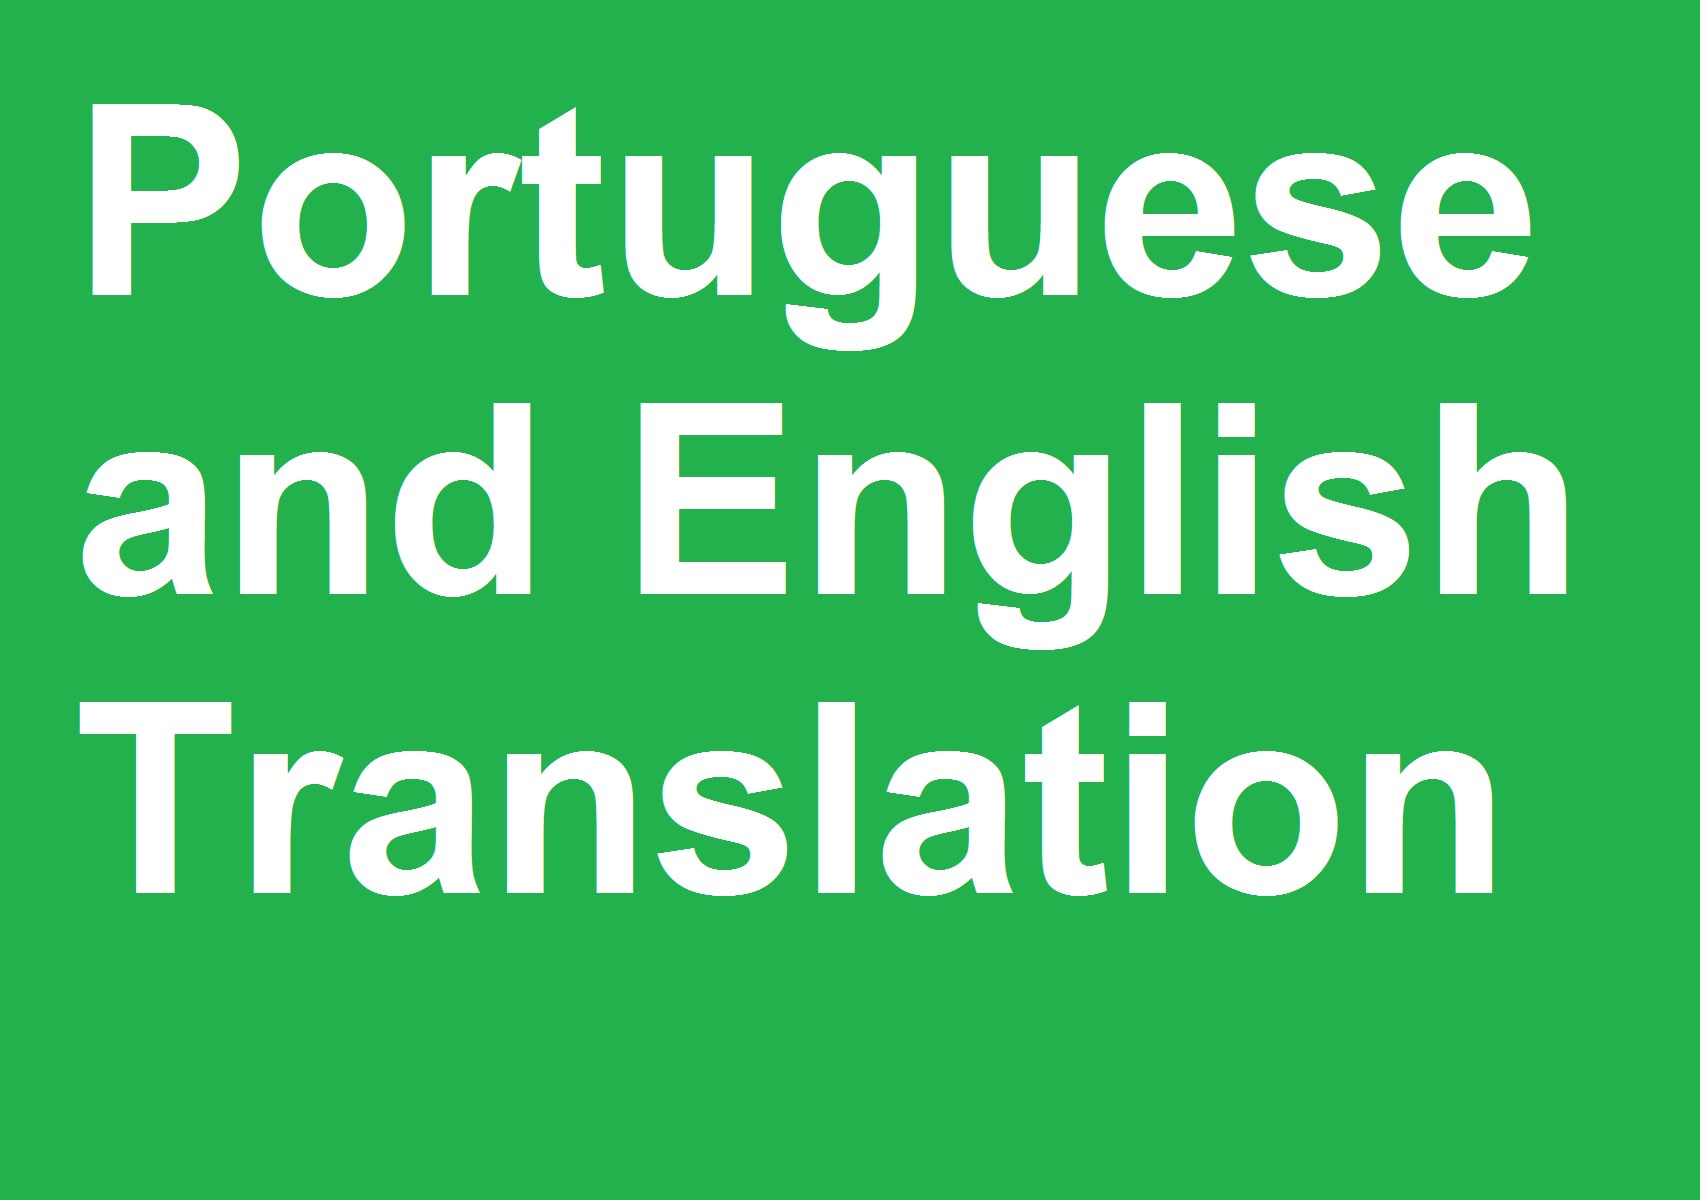 A beginner's guide to translating Portuguese to English